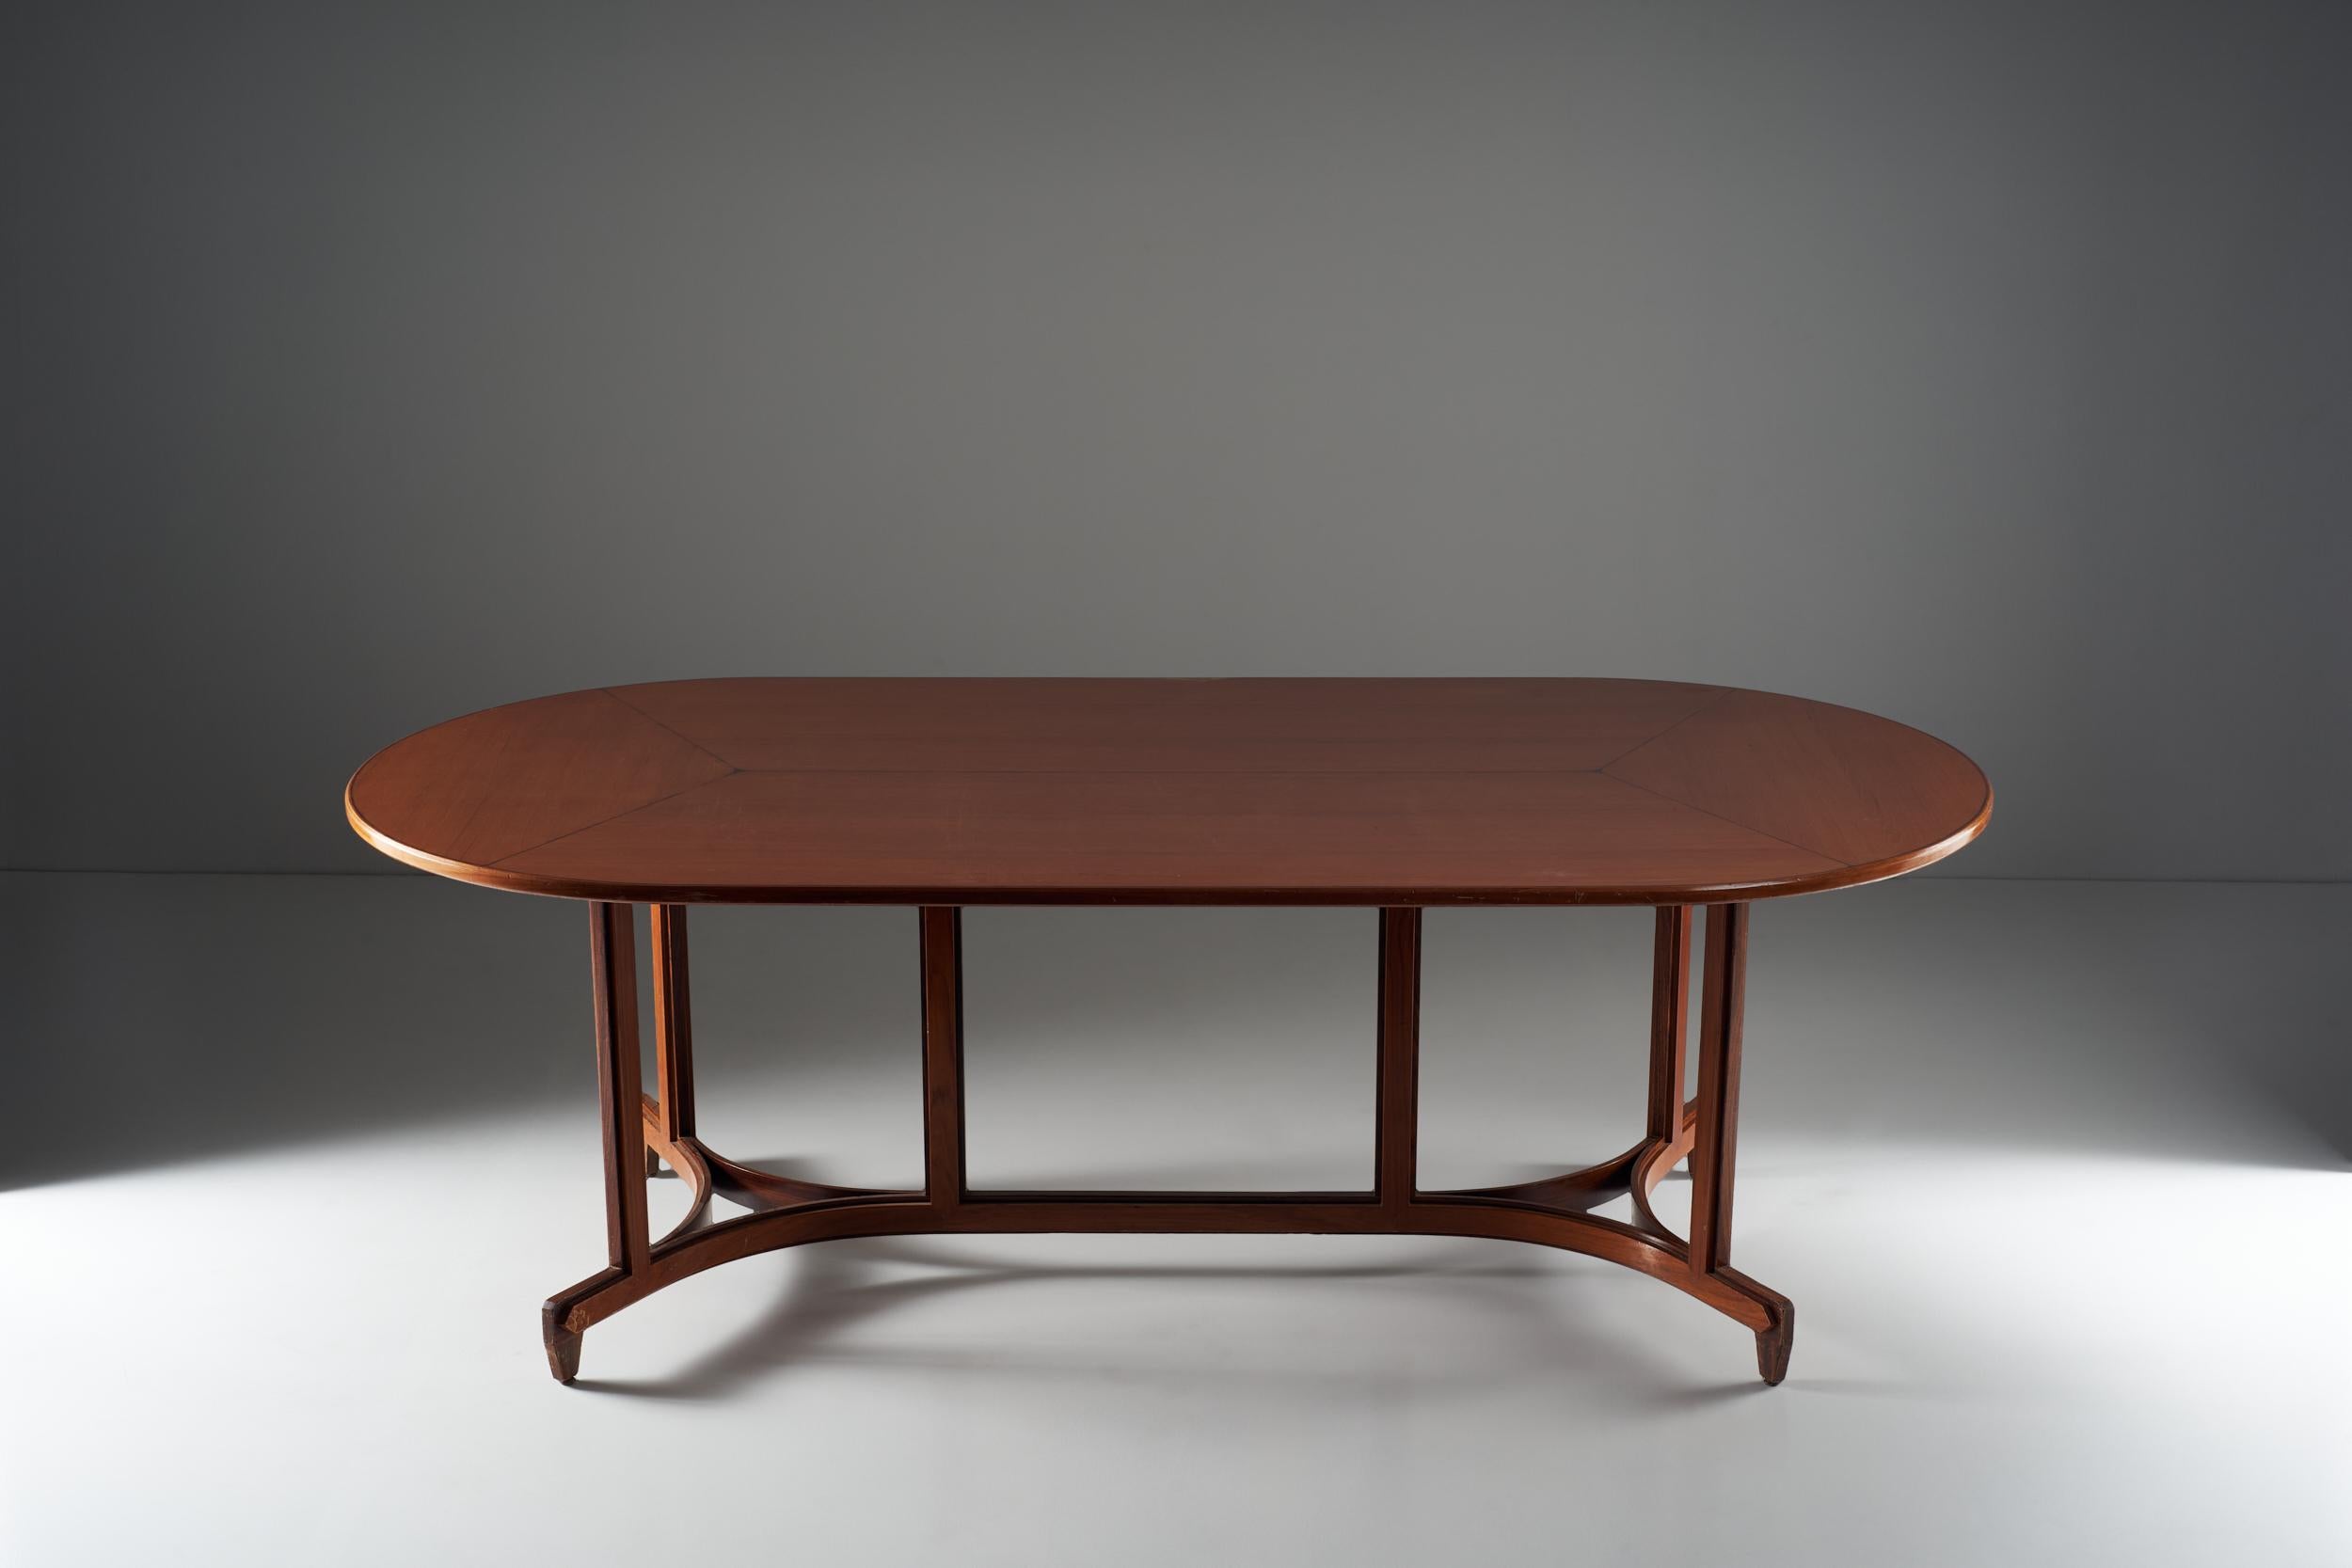 A masterfully executed wooden table, is composed by three main spaces along the underside to support a long and thin oval top with a complex and laborious structure. The feet rotates according to two distinct arches at the base of the table,